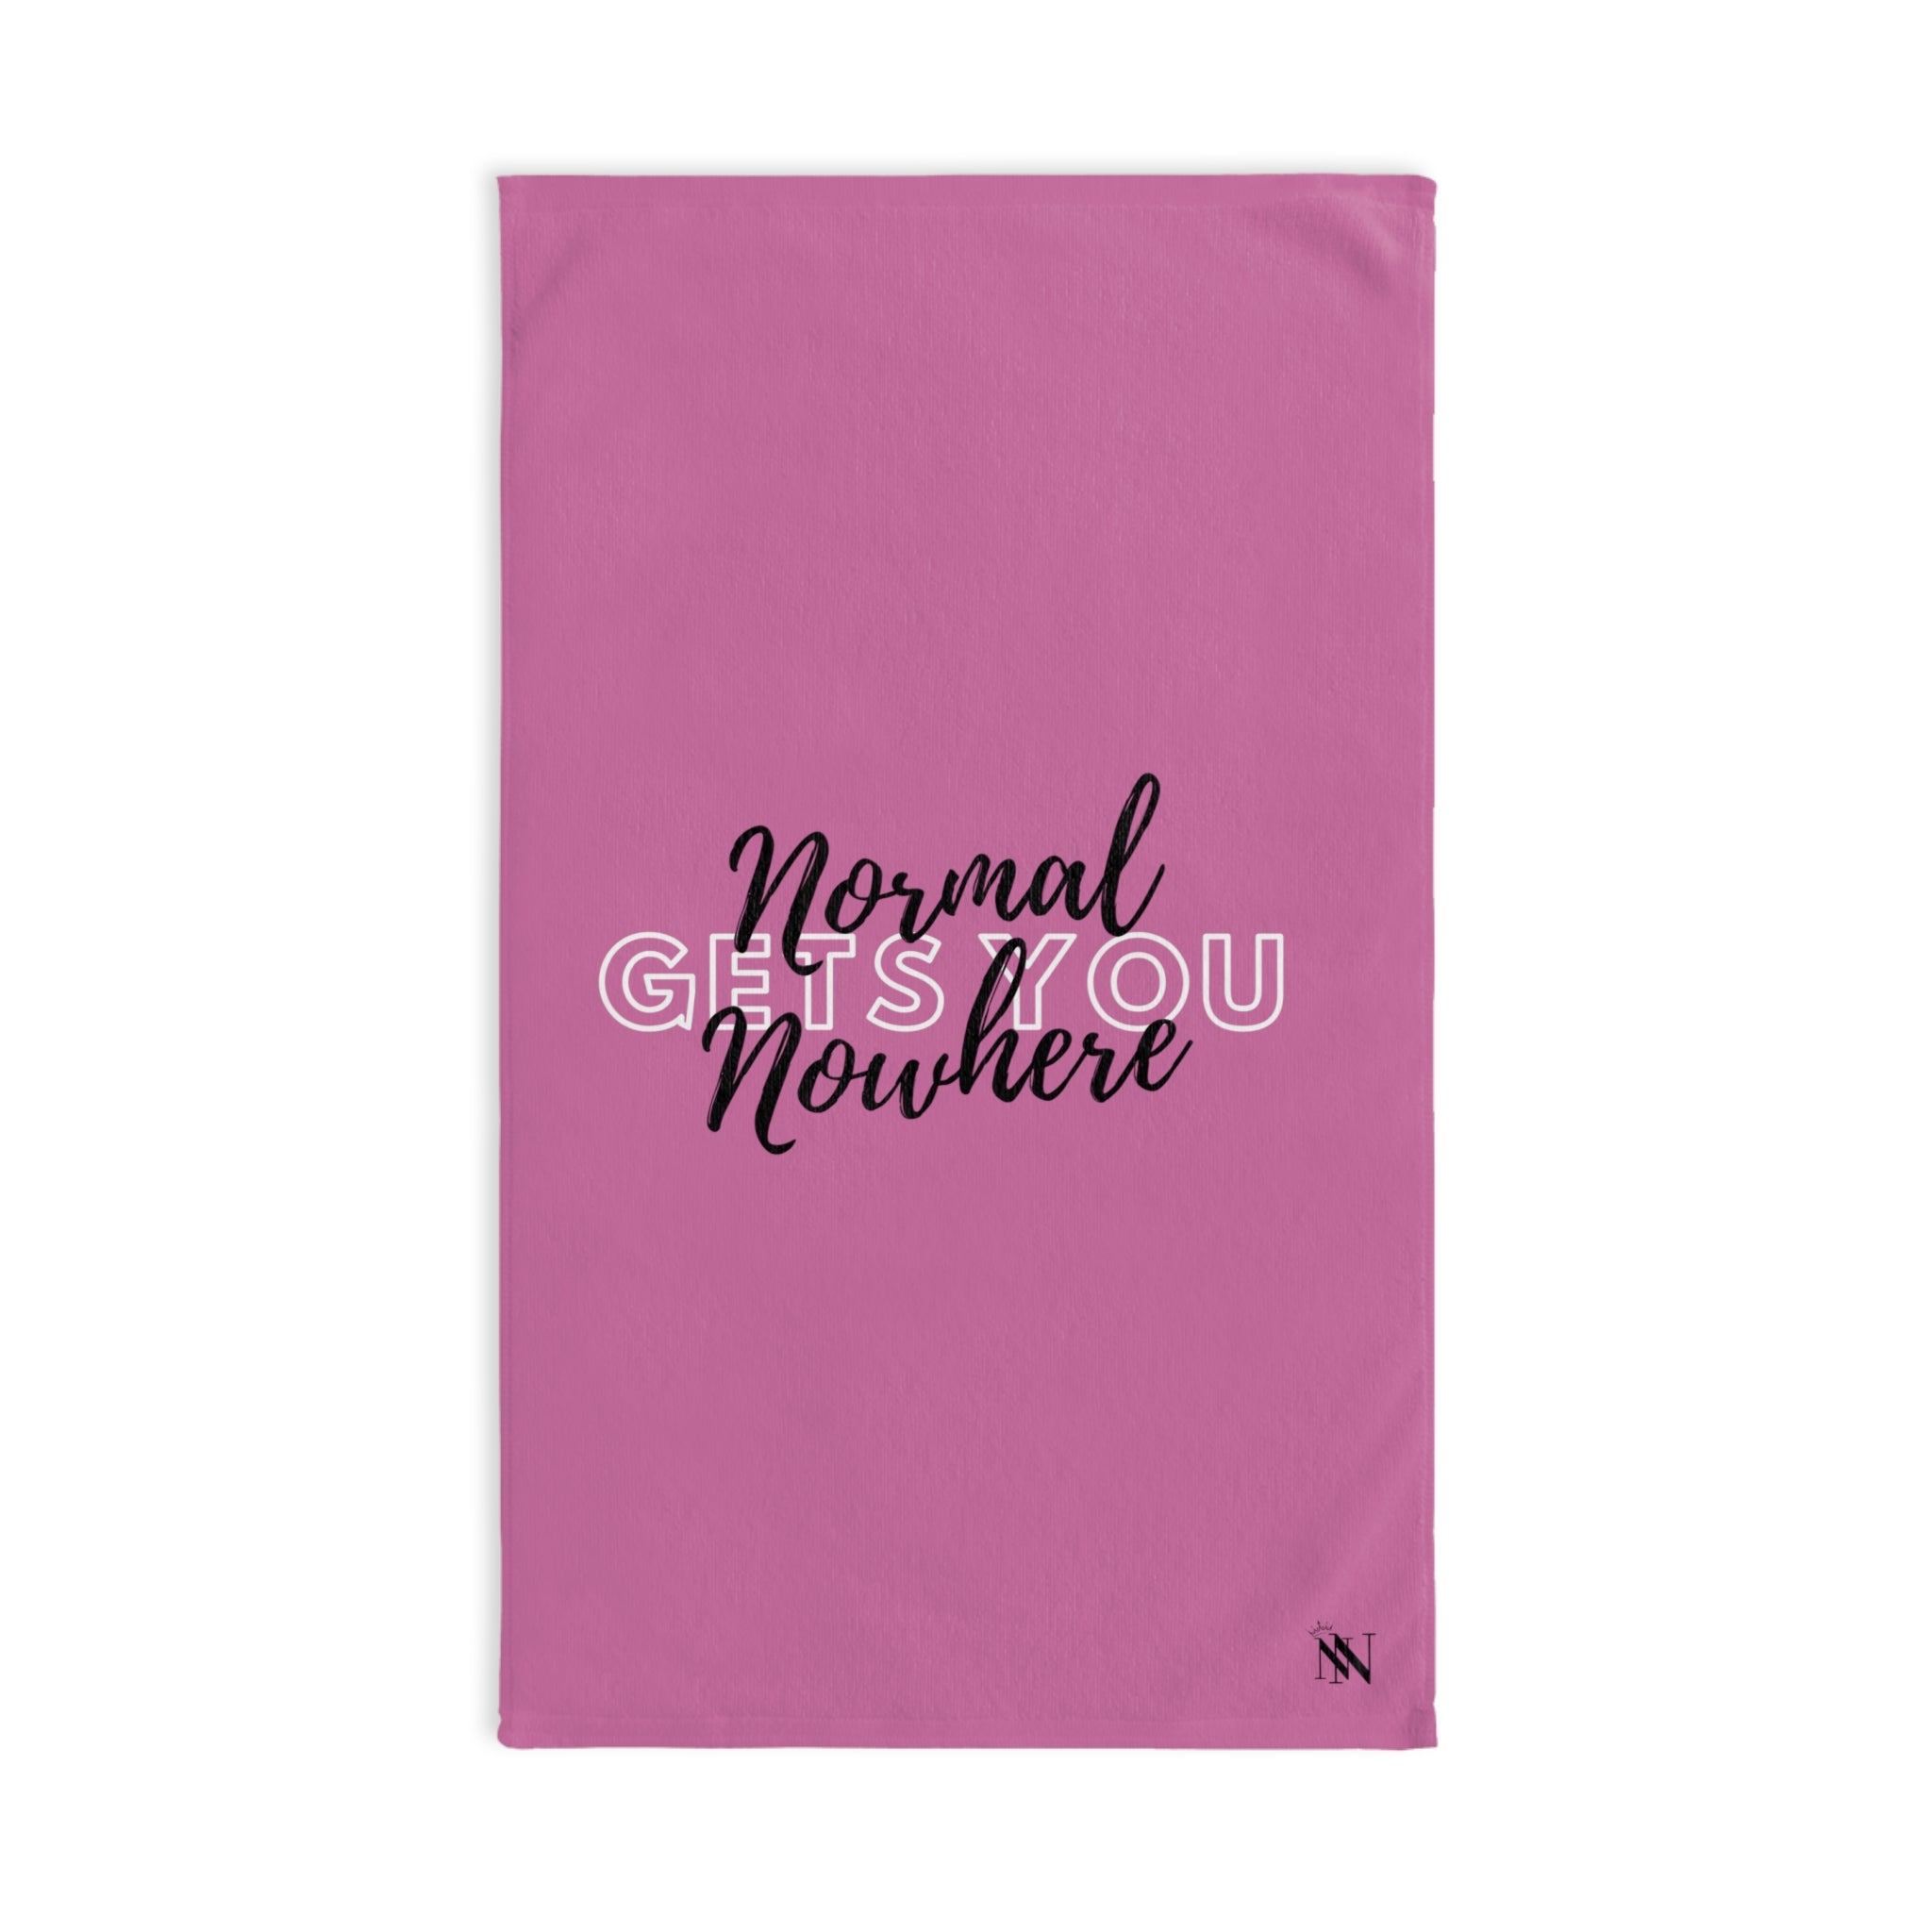 Normal Nowhere Pink | Novelty Gifts for Boyfriend, Funny Towel Romantic Gift for Wedding Couple Fiance First Year Anniversary Valentines, Party Gag Gifts, Joke Humor Cloth for Husband Men BF NECTAR NAPKINS